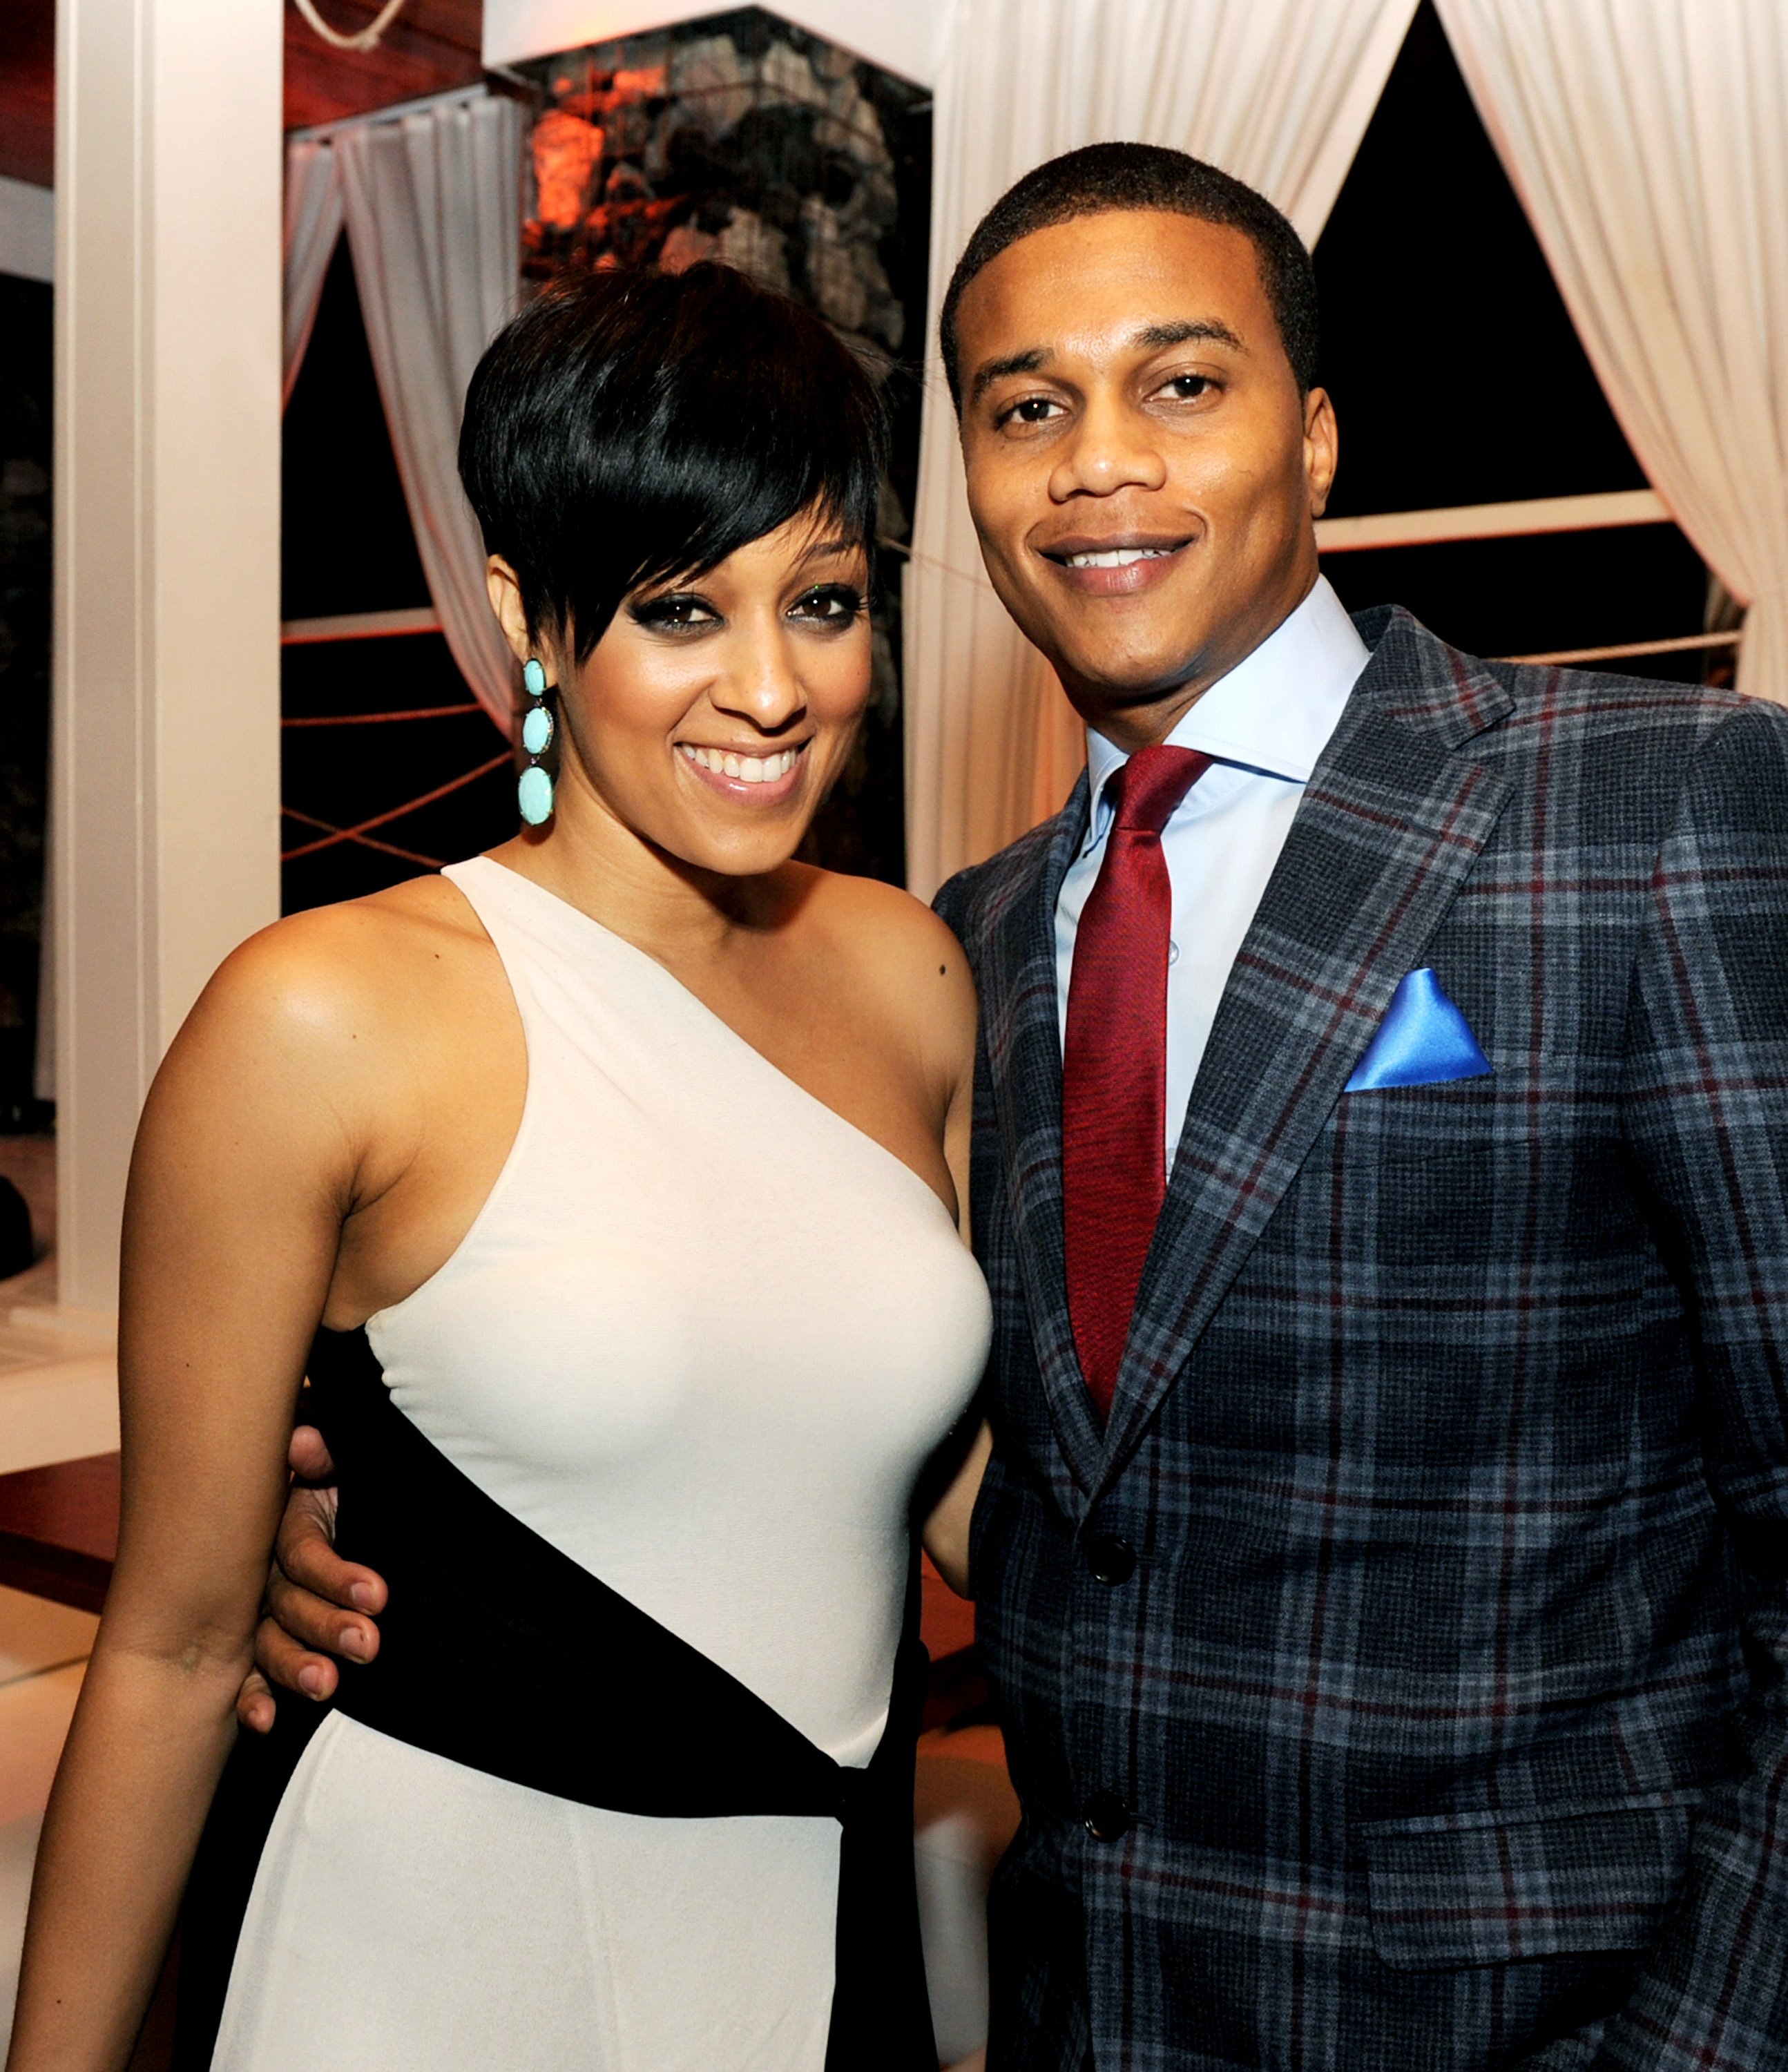 Actress Tia Mowry and her husband actor Cory Hardict during the after party for the premiere of "Warm Bodies" at The Colony on January 29, 2013 in Los Angeles, California. | Source: Getty Images